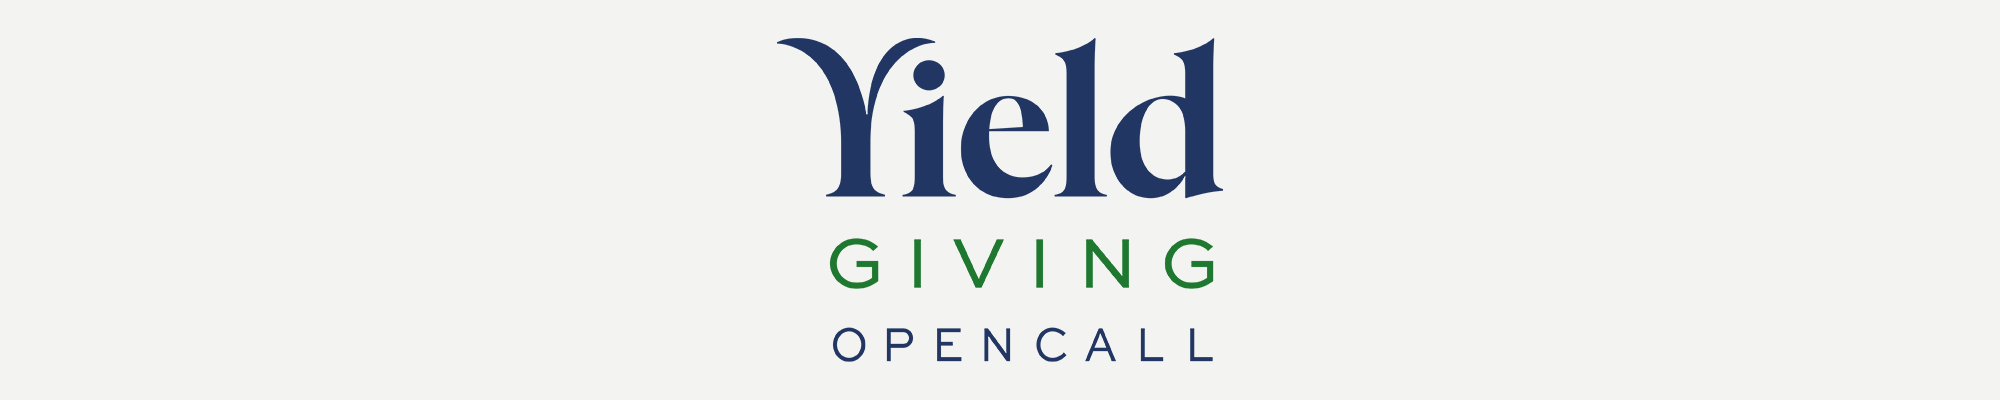 Blue and green text reading 'Yield Giving Open Call' on a light gray background